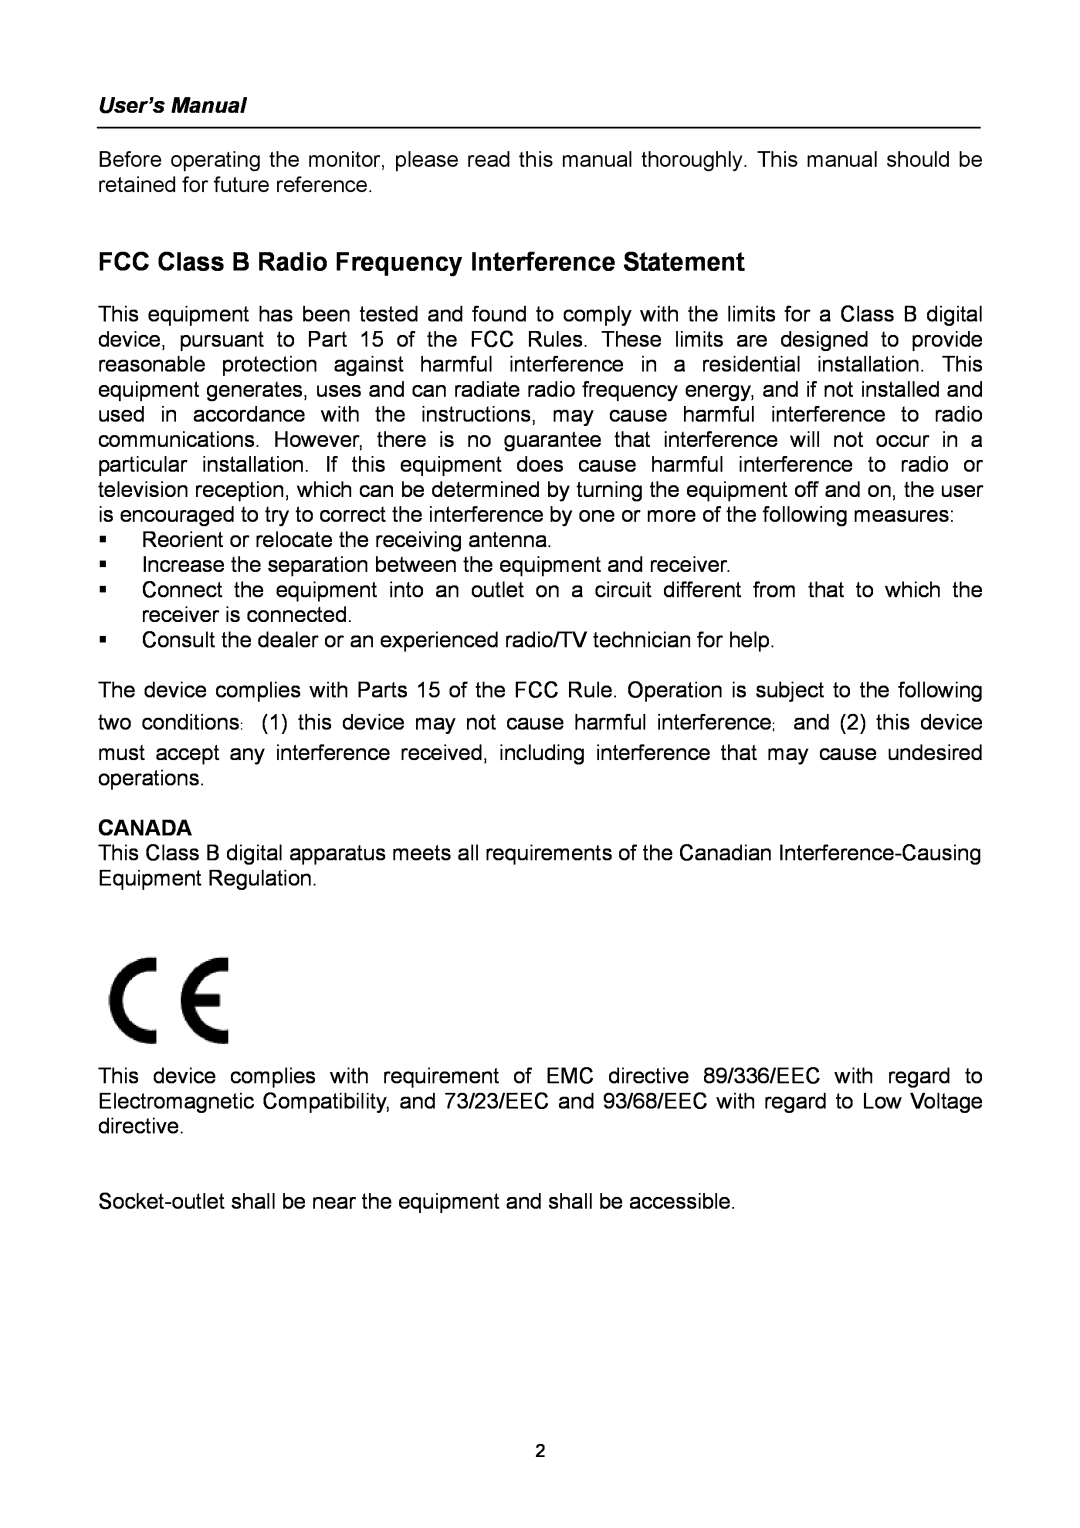 Compaq HW194 user manual FCC Class B Radio Frequency Interference Statement, User’s Manual, Canada 